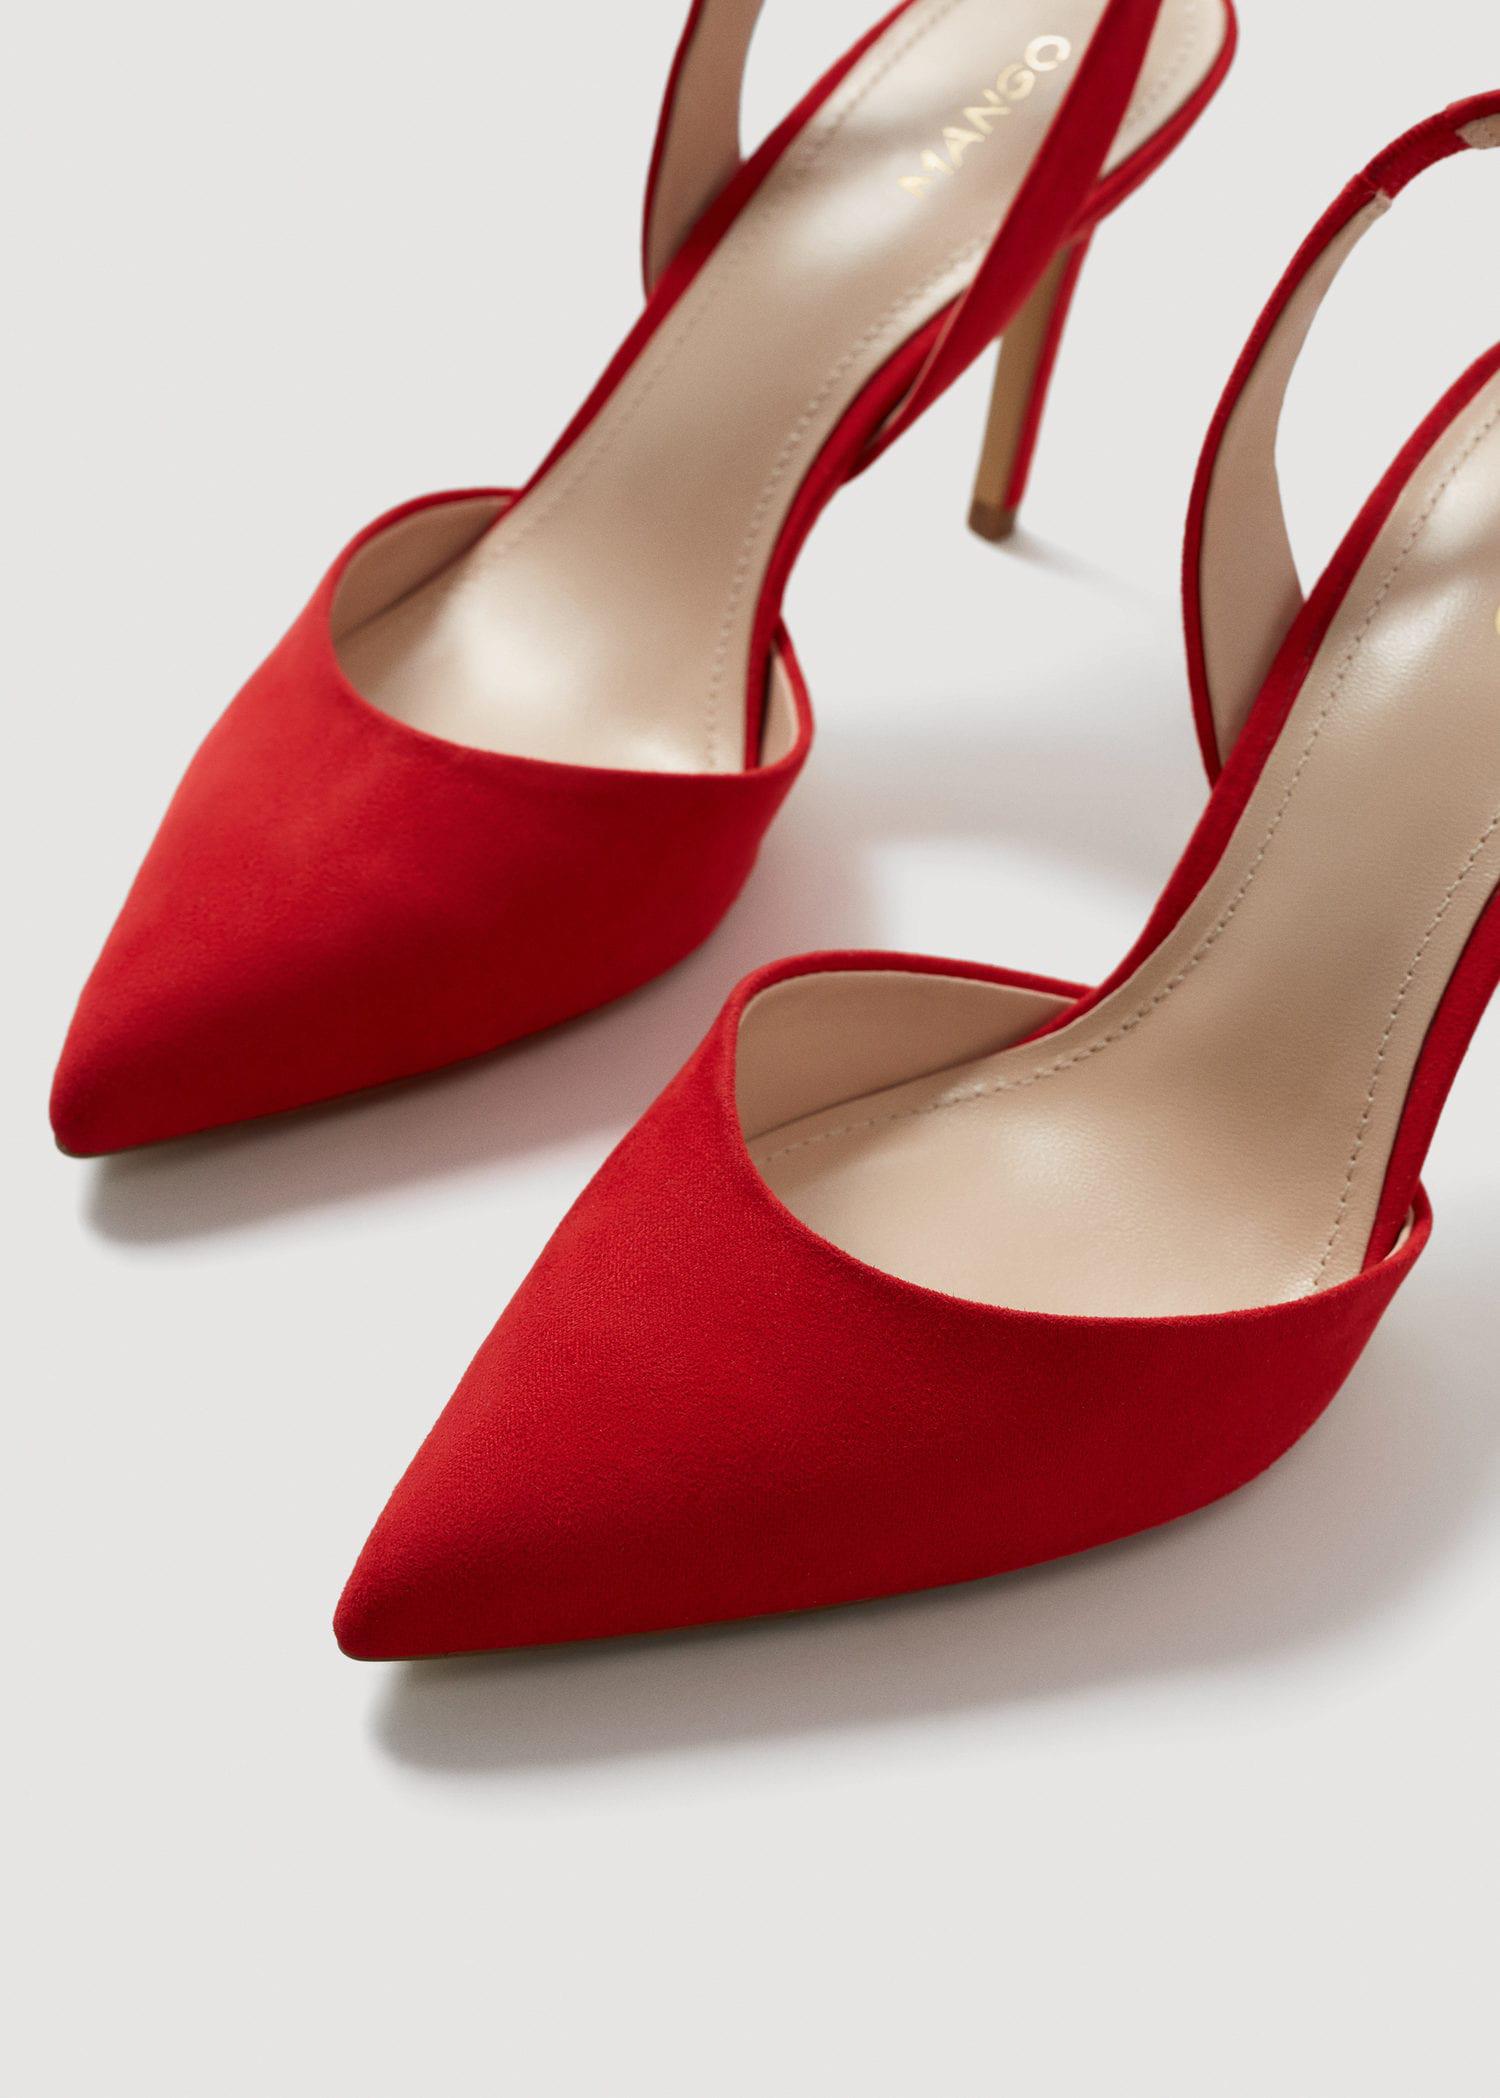 Mango Slingback Heel Shoes in Red - Lyst